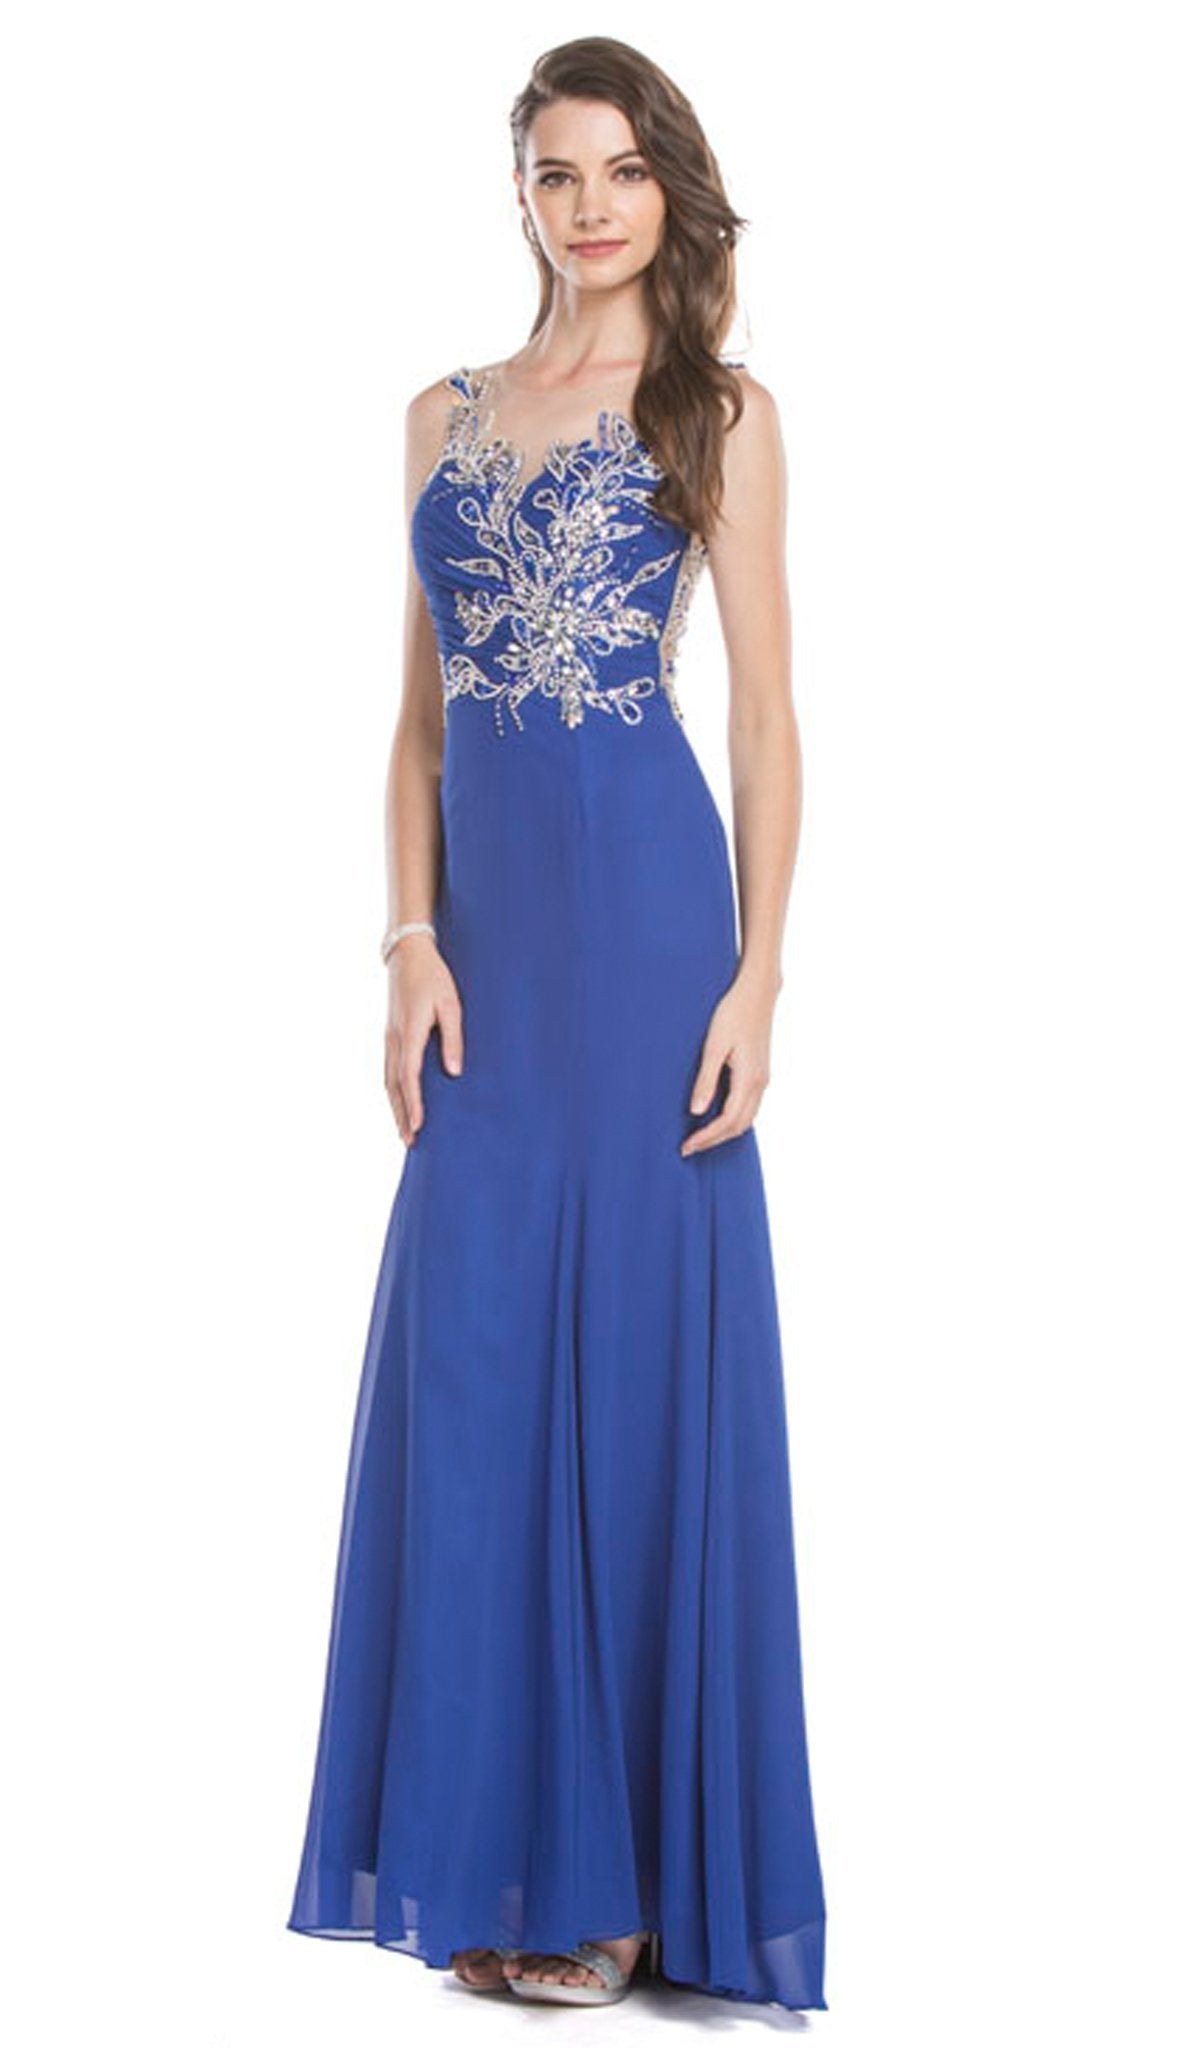 Image of Aspeed Design - Sheer Sleeveless Affordable Prom Gown